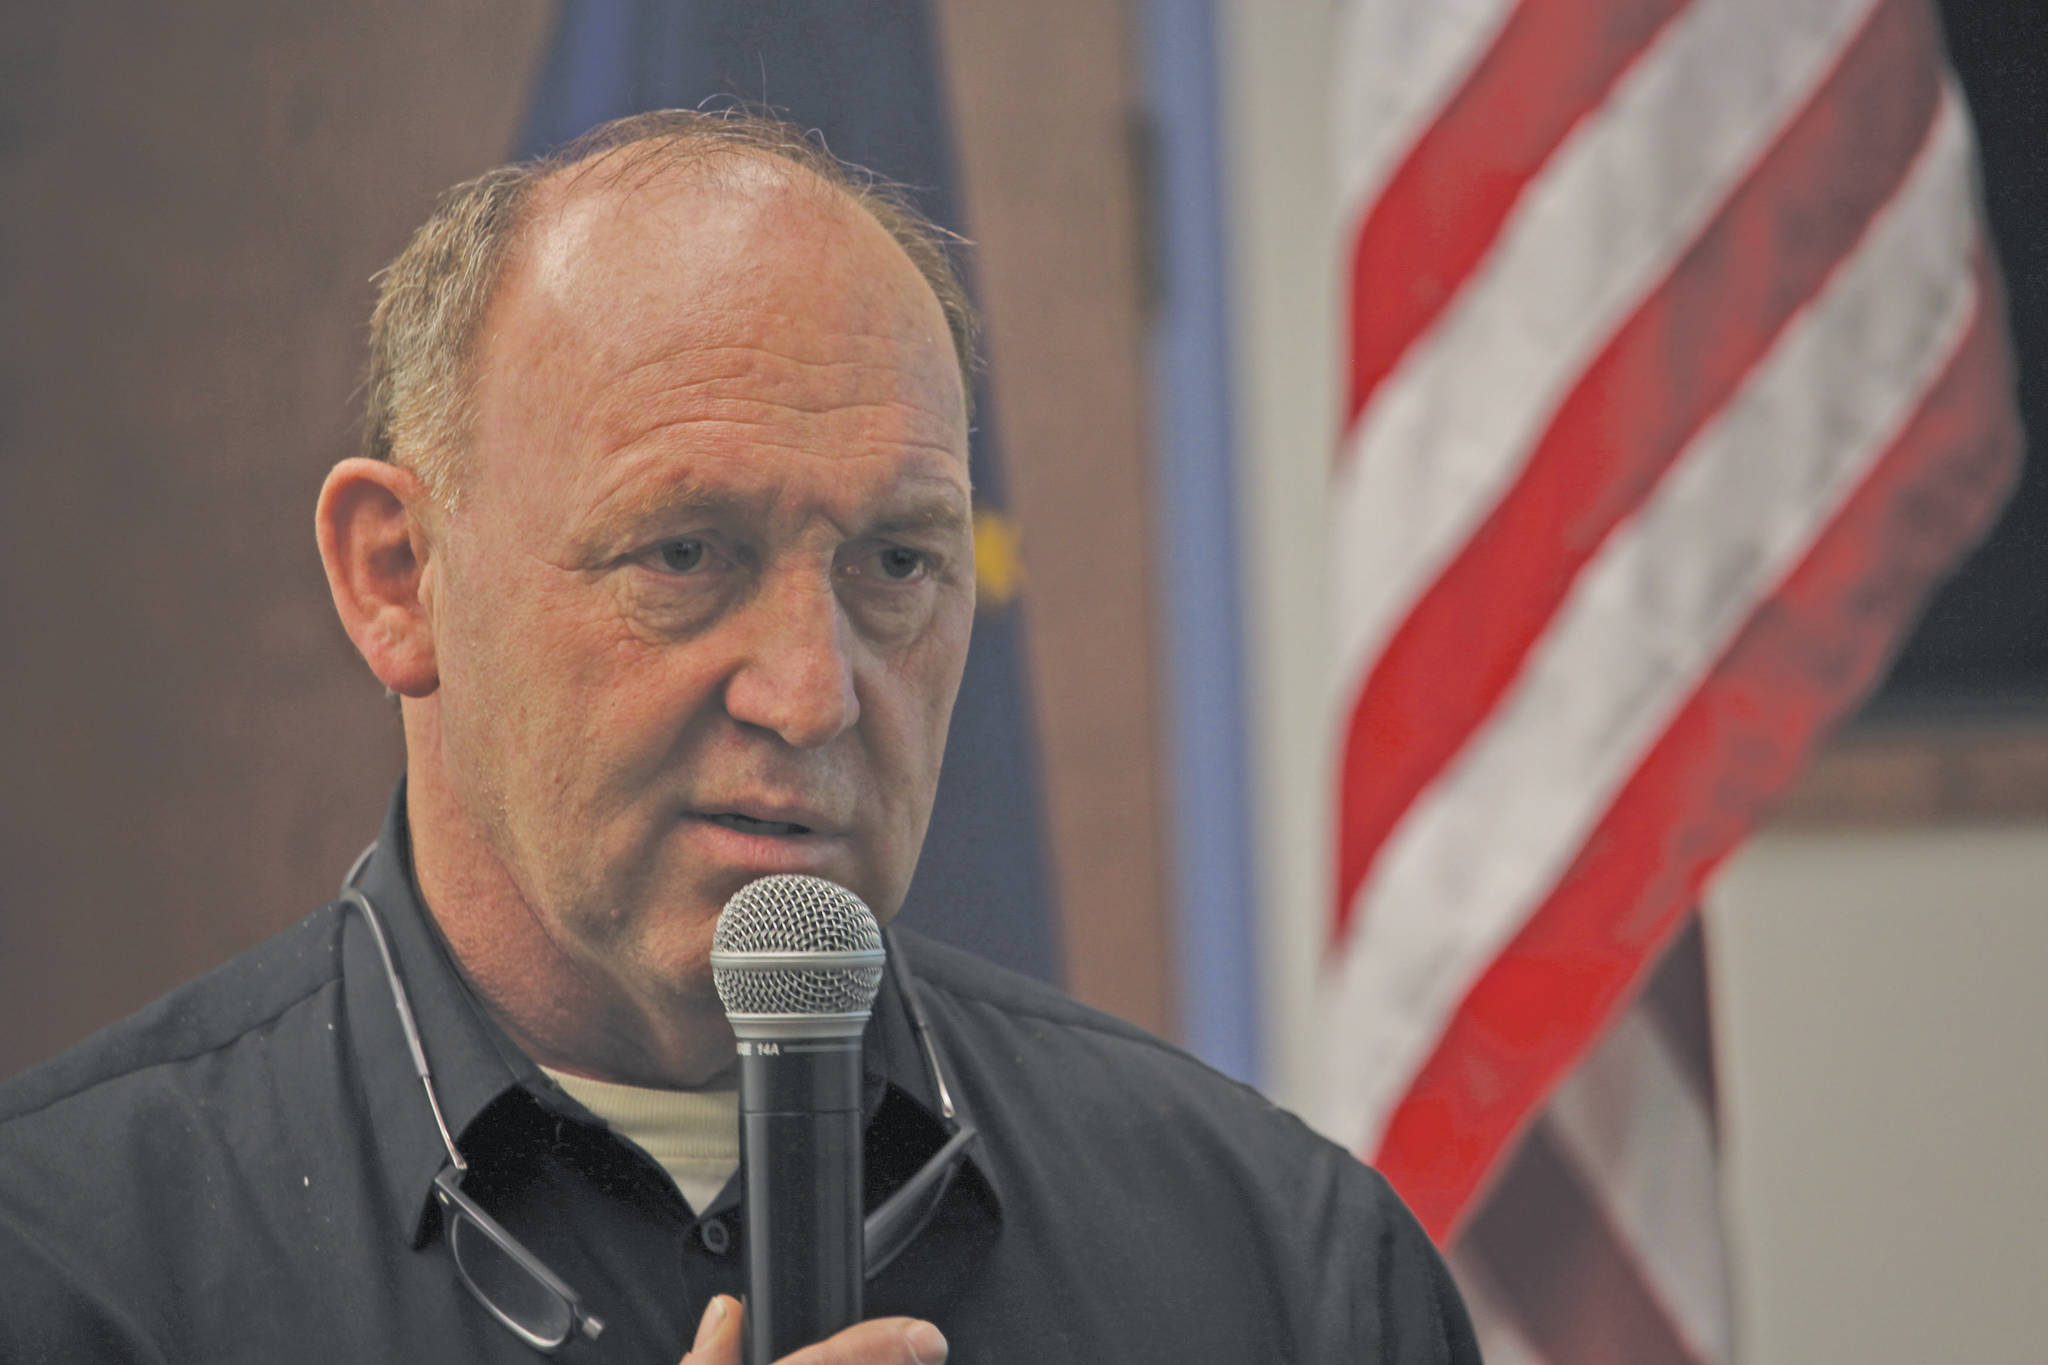 Rep. Gary Knopp, R-Soldotna, speaks to constituents during a town hall at the Kenai Visitor and Cultural Center in Kenai, Alaska on Jan. 9, 2020. (Photo by Brian Mazurek/Peninsula Clarion)